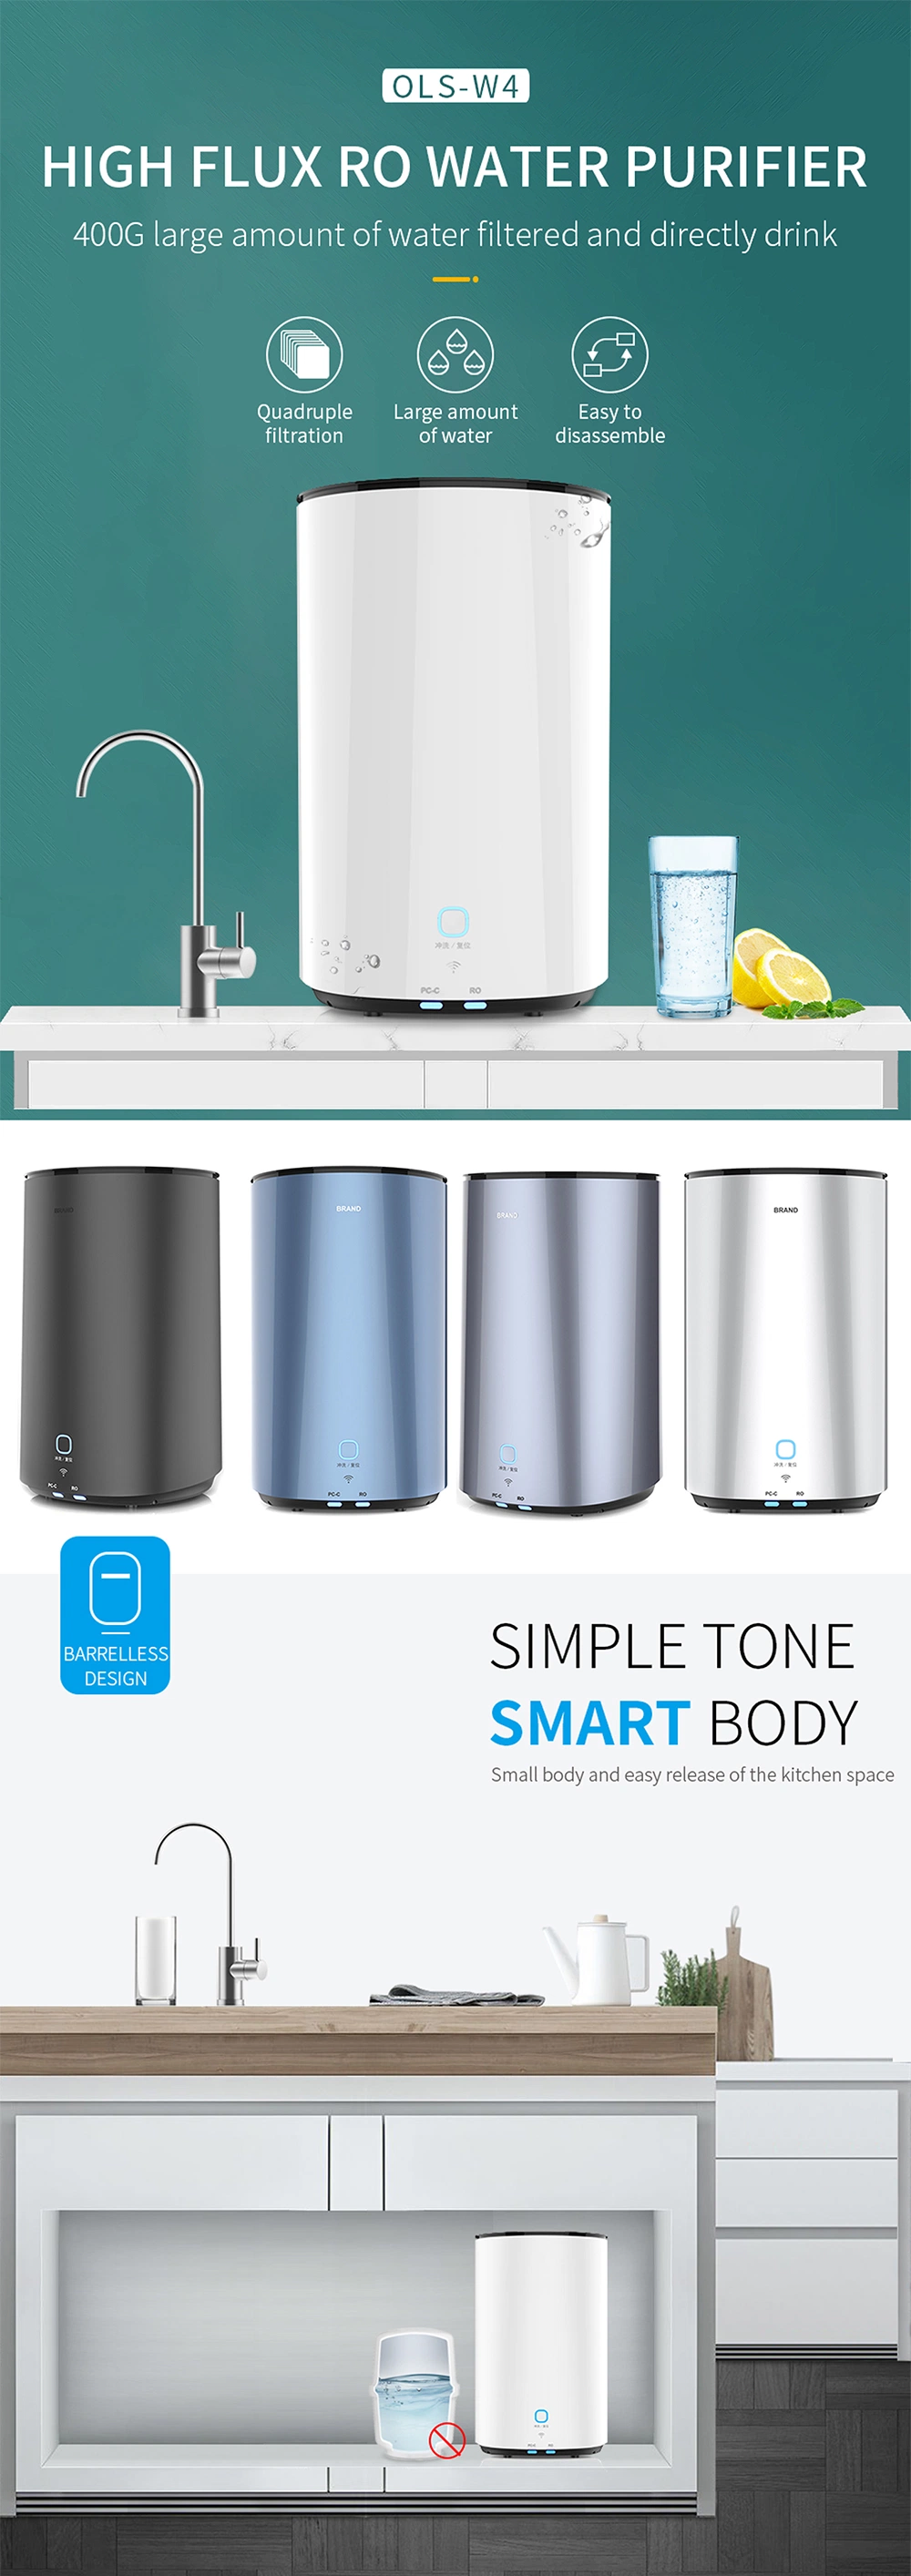 Smart WiFi Control Direct Drinking 400g House Hold Reverse Osmosis System Faucet Water Purifier Water Filters